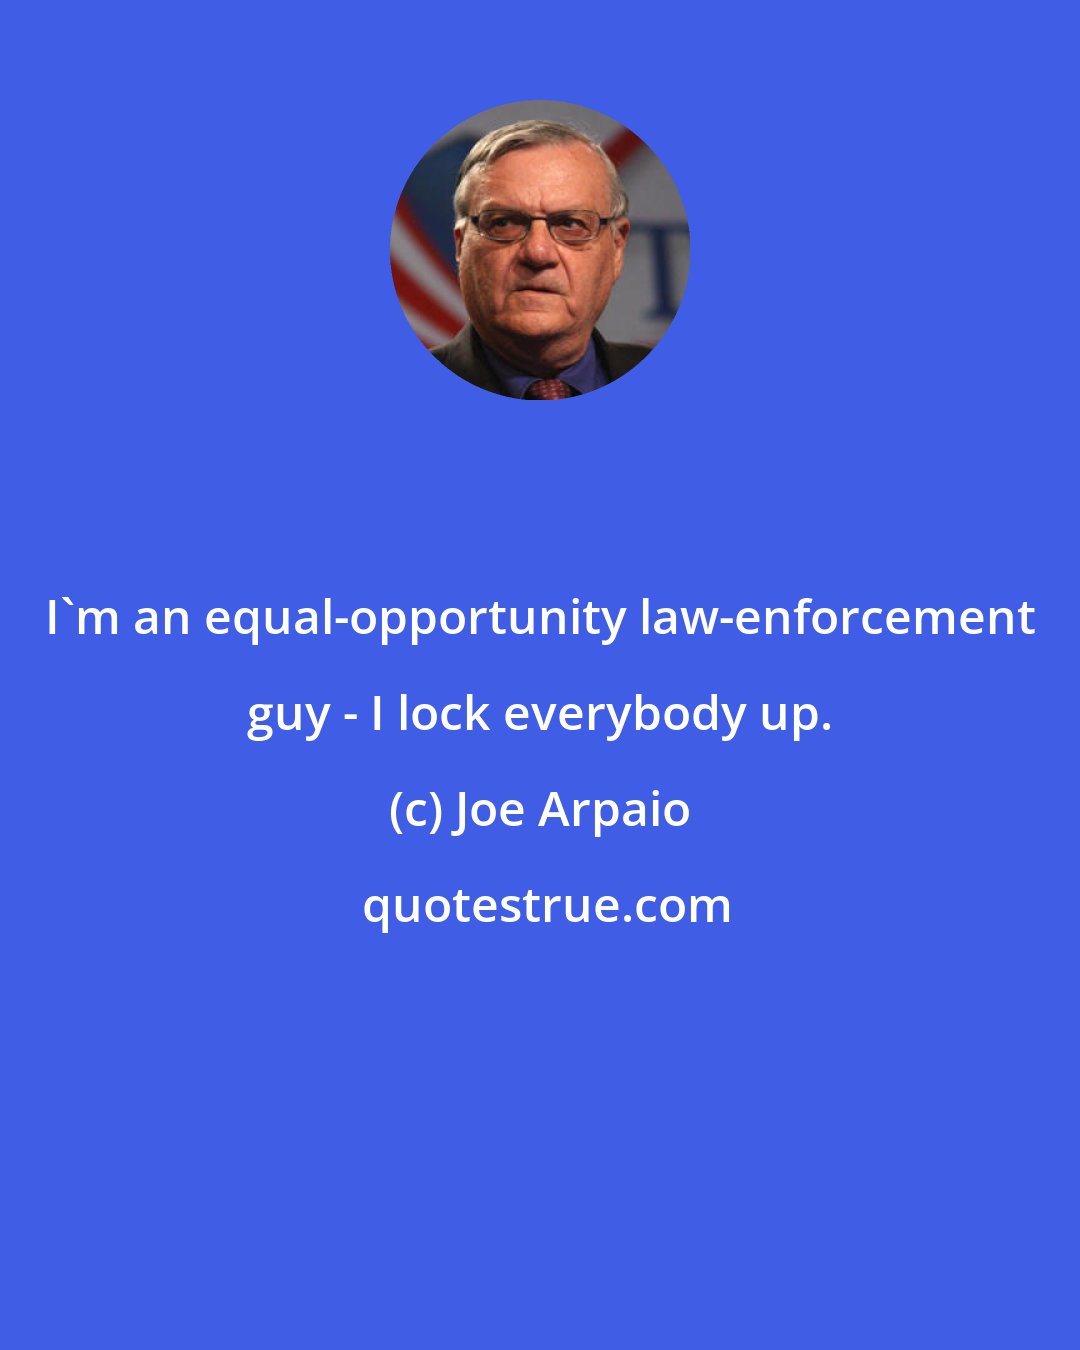 Joe Arpaio: I'm an equal-opportunity law-enforcement guy - I lock everybody up.